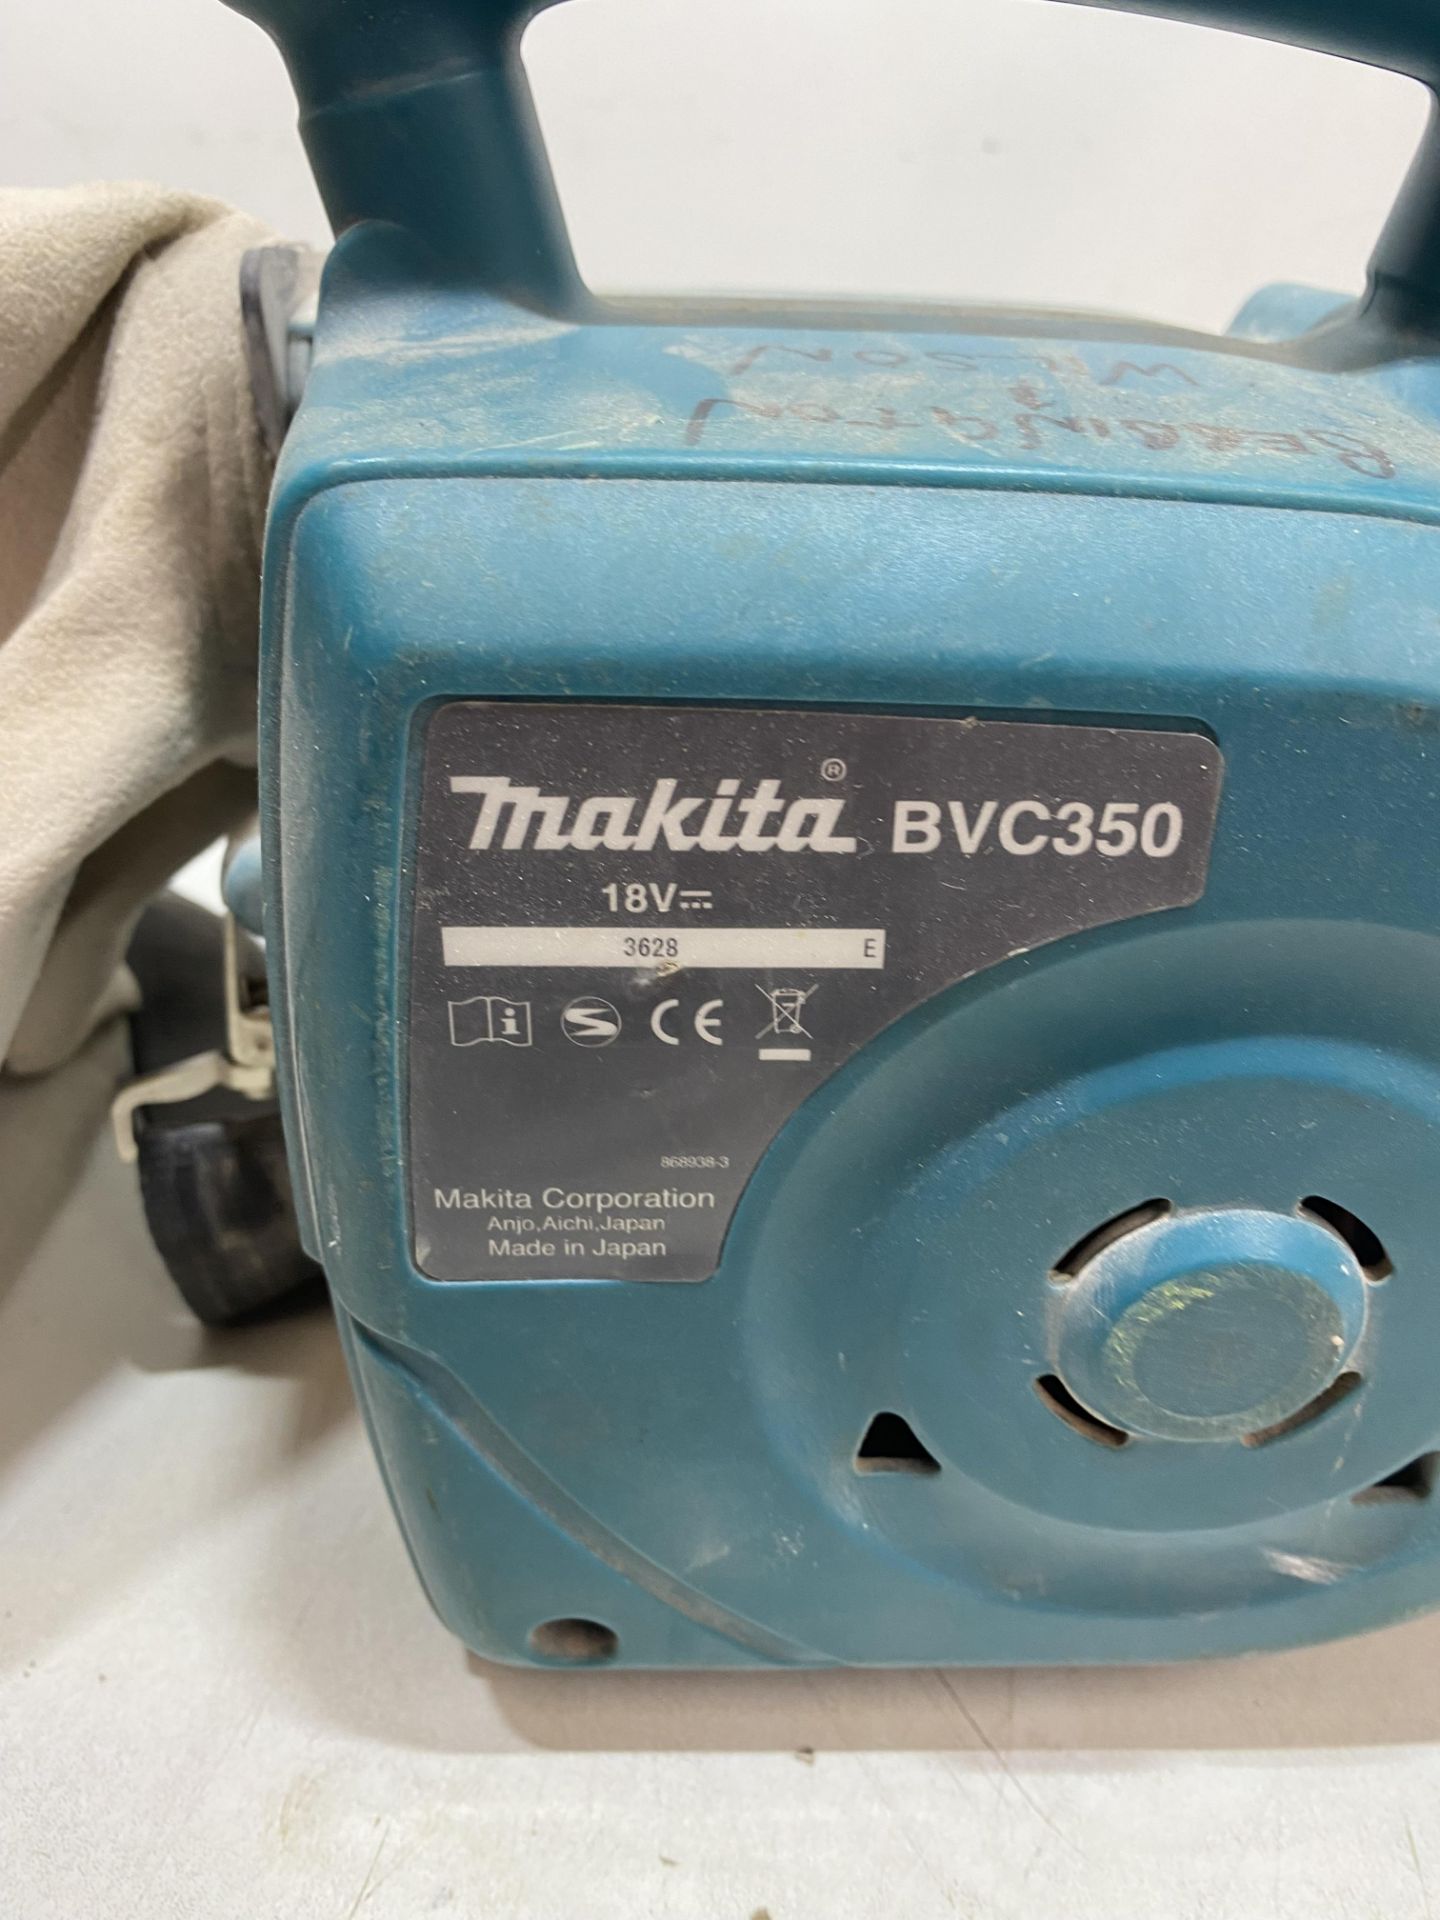 Makita BVC350 18v Dust Extractor - See Pictures - Image 7 of 7